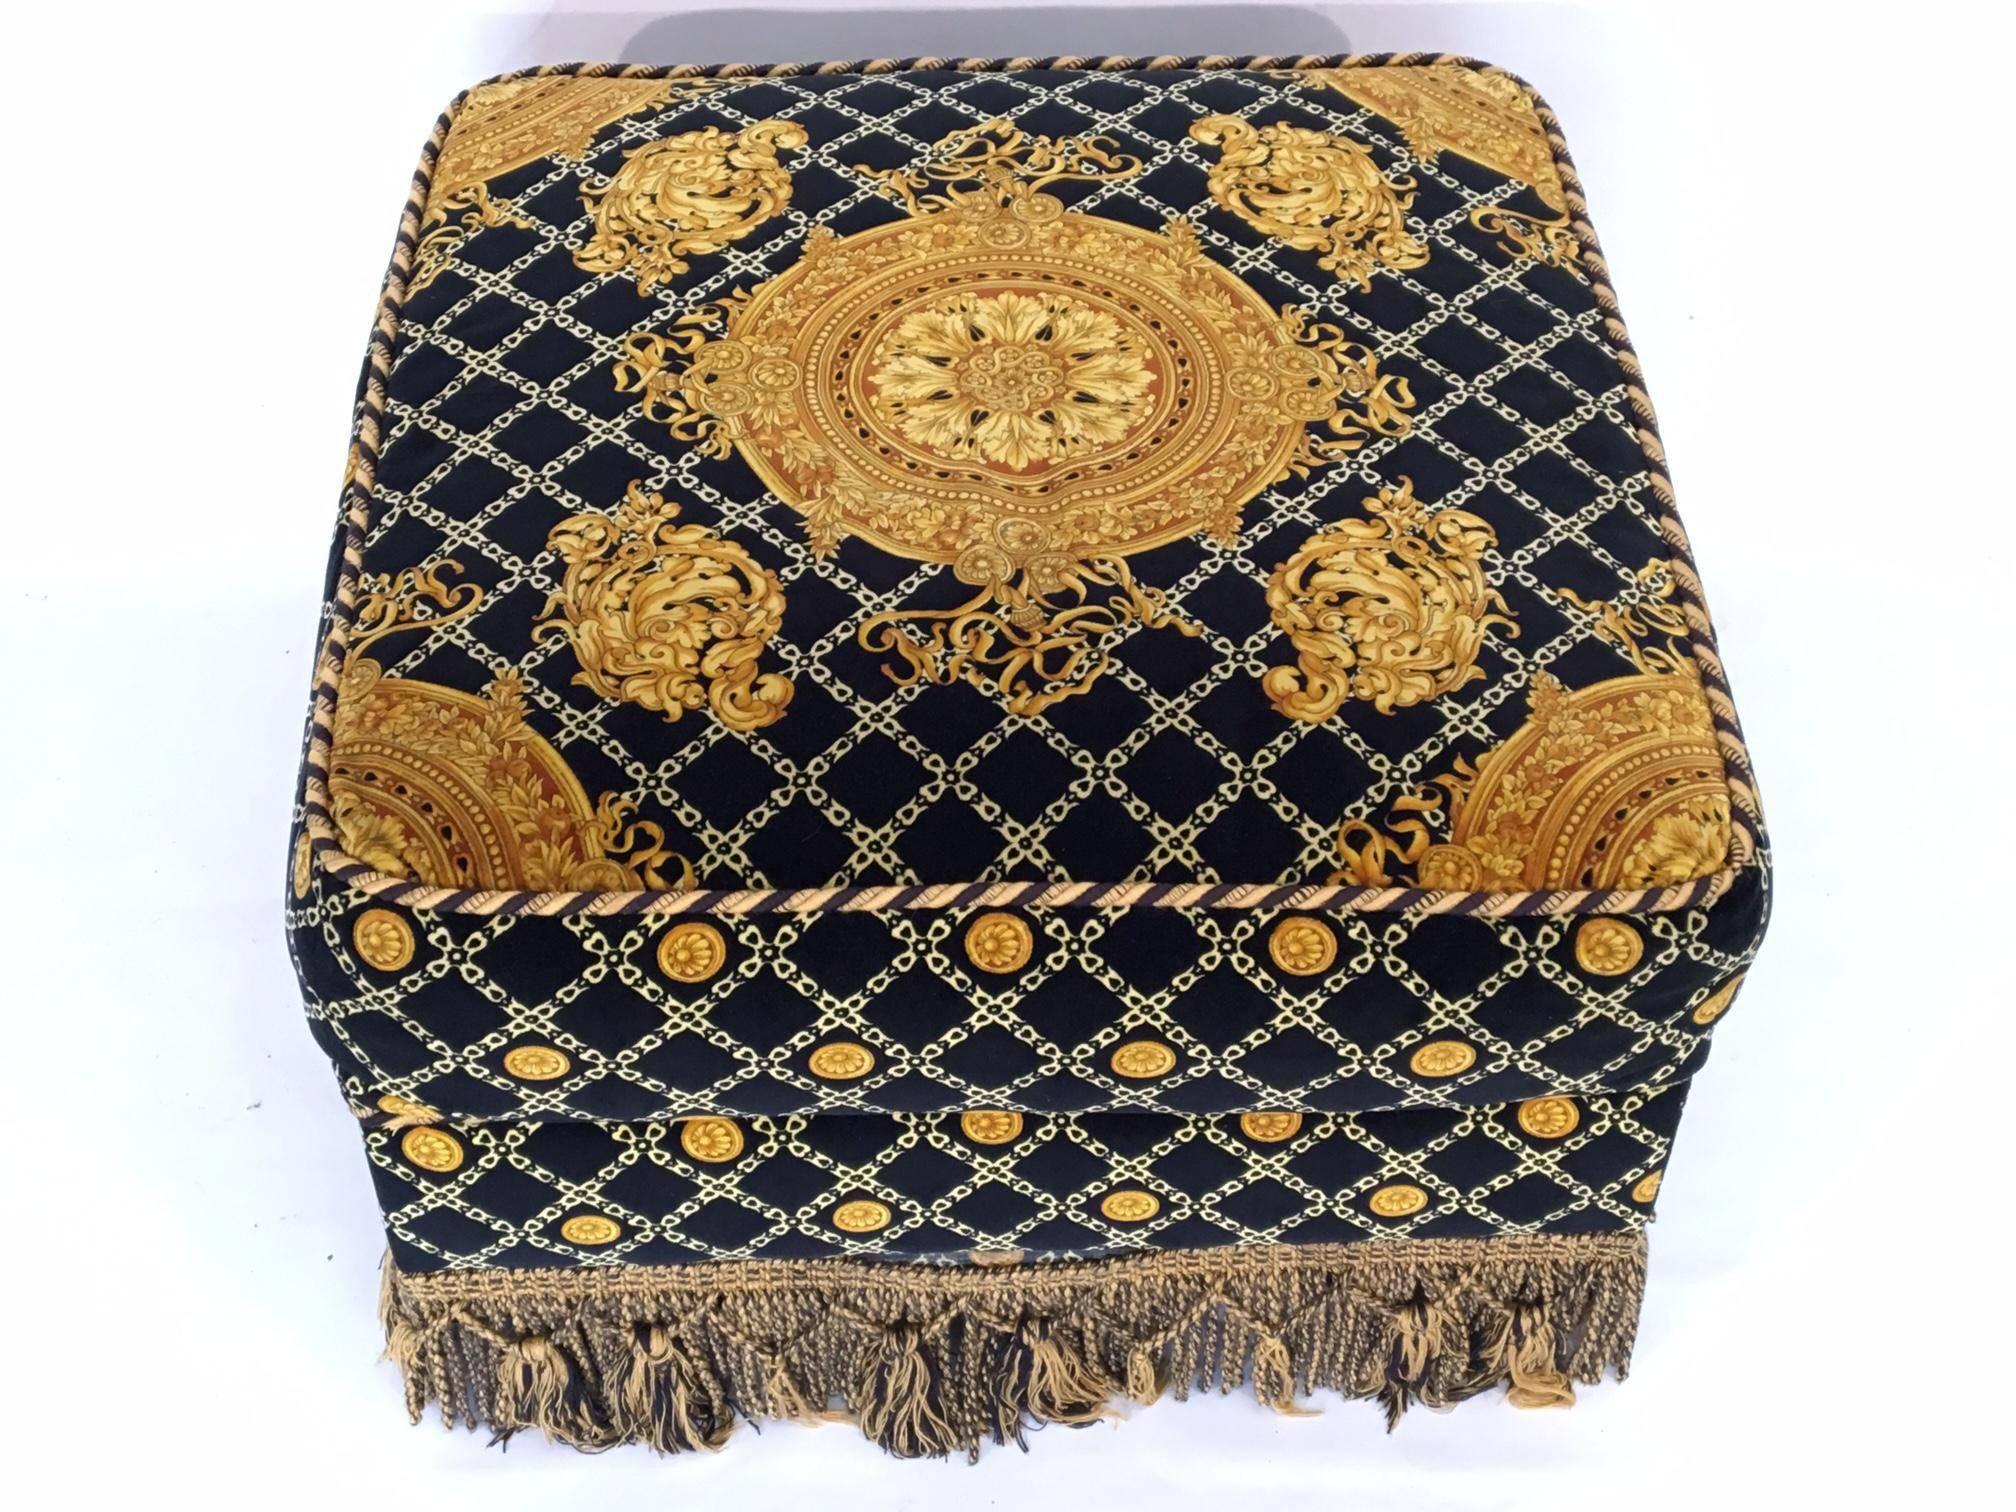 Plush upholstered ottoman by Stefano Giovanni (Jiovanni) of Italy. Upholstered in a Versace style print. Excellent vintage condition other than trim which has some missing tassels. Matching pair of sofas and coffee table also available.